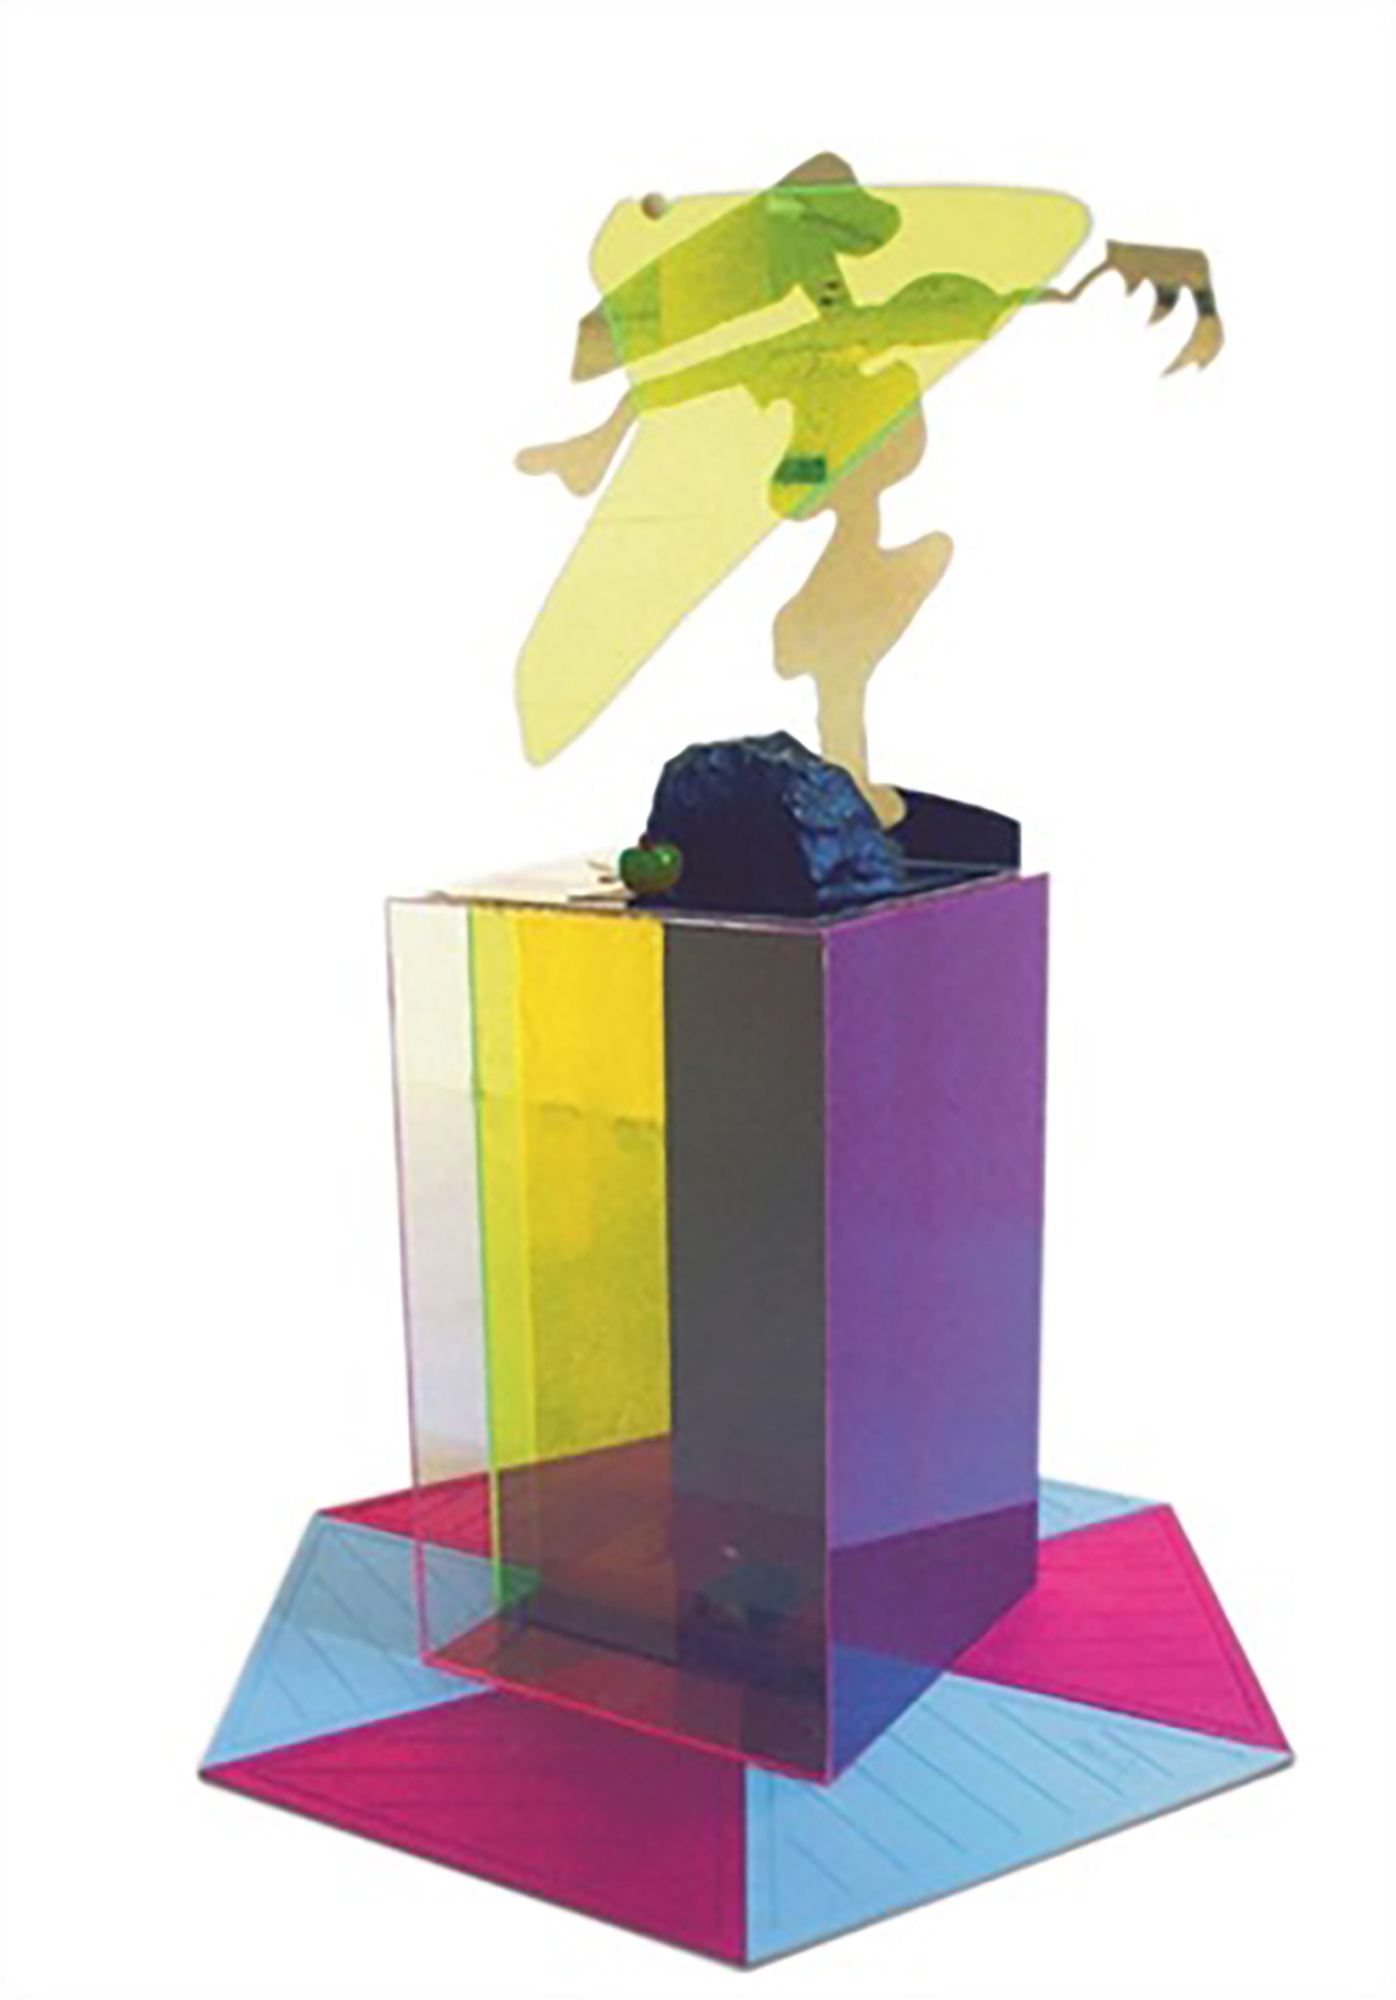 Gary Webb, Capital Claw 3, 2002, perspex, plastic moulded rock, polished steel, glass apple(green), rubber and strobe lights, 196 × 107 × 130 cm